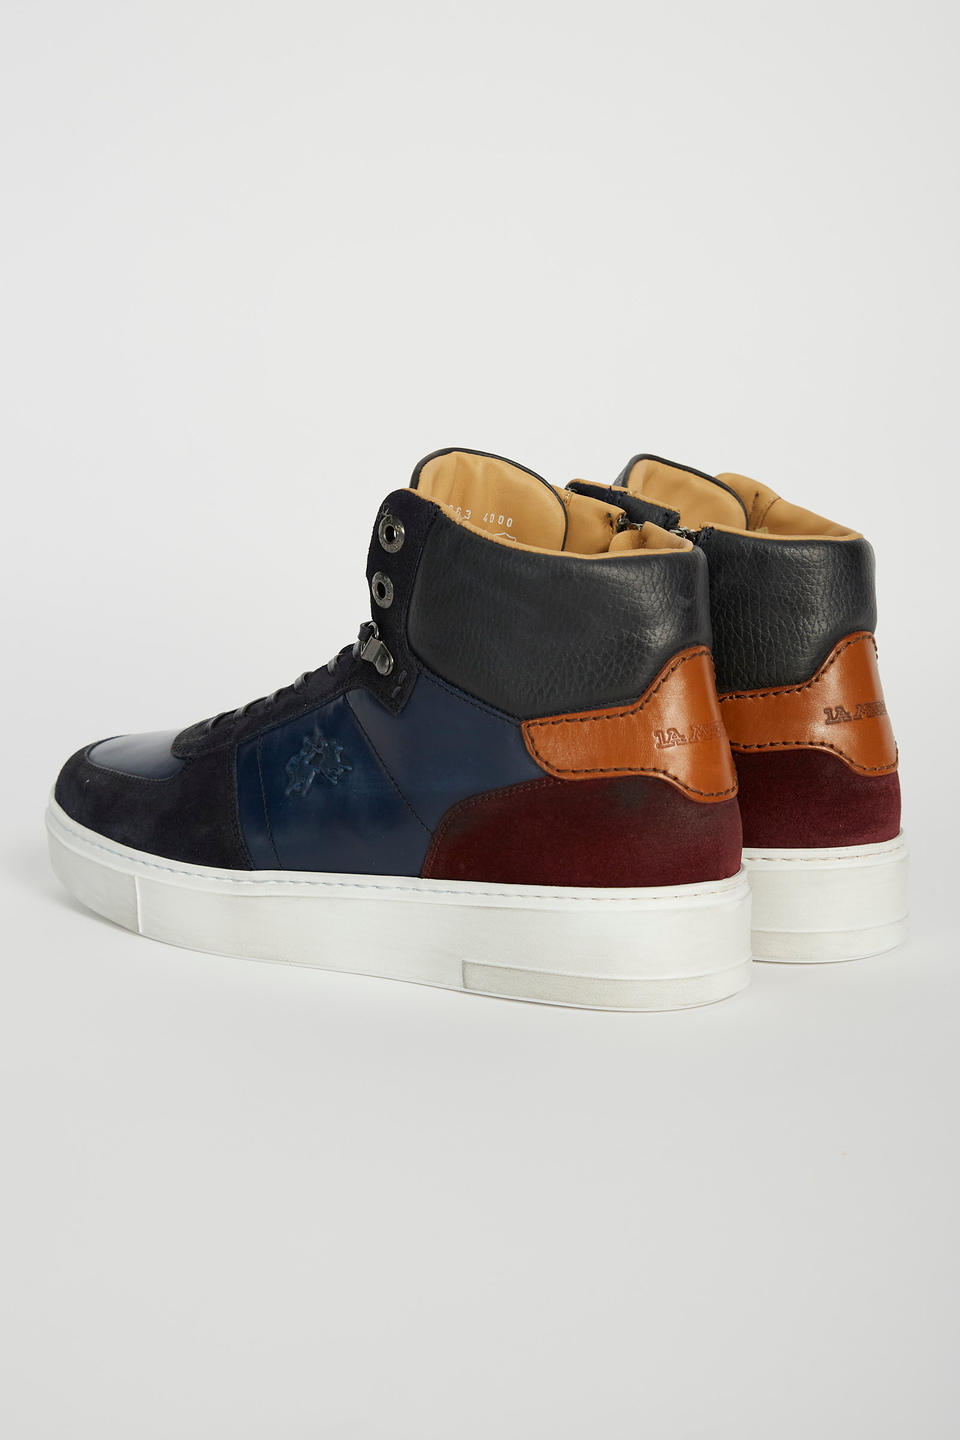 Mixed leather trainers | La Martina - Official Online Shop